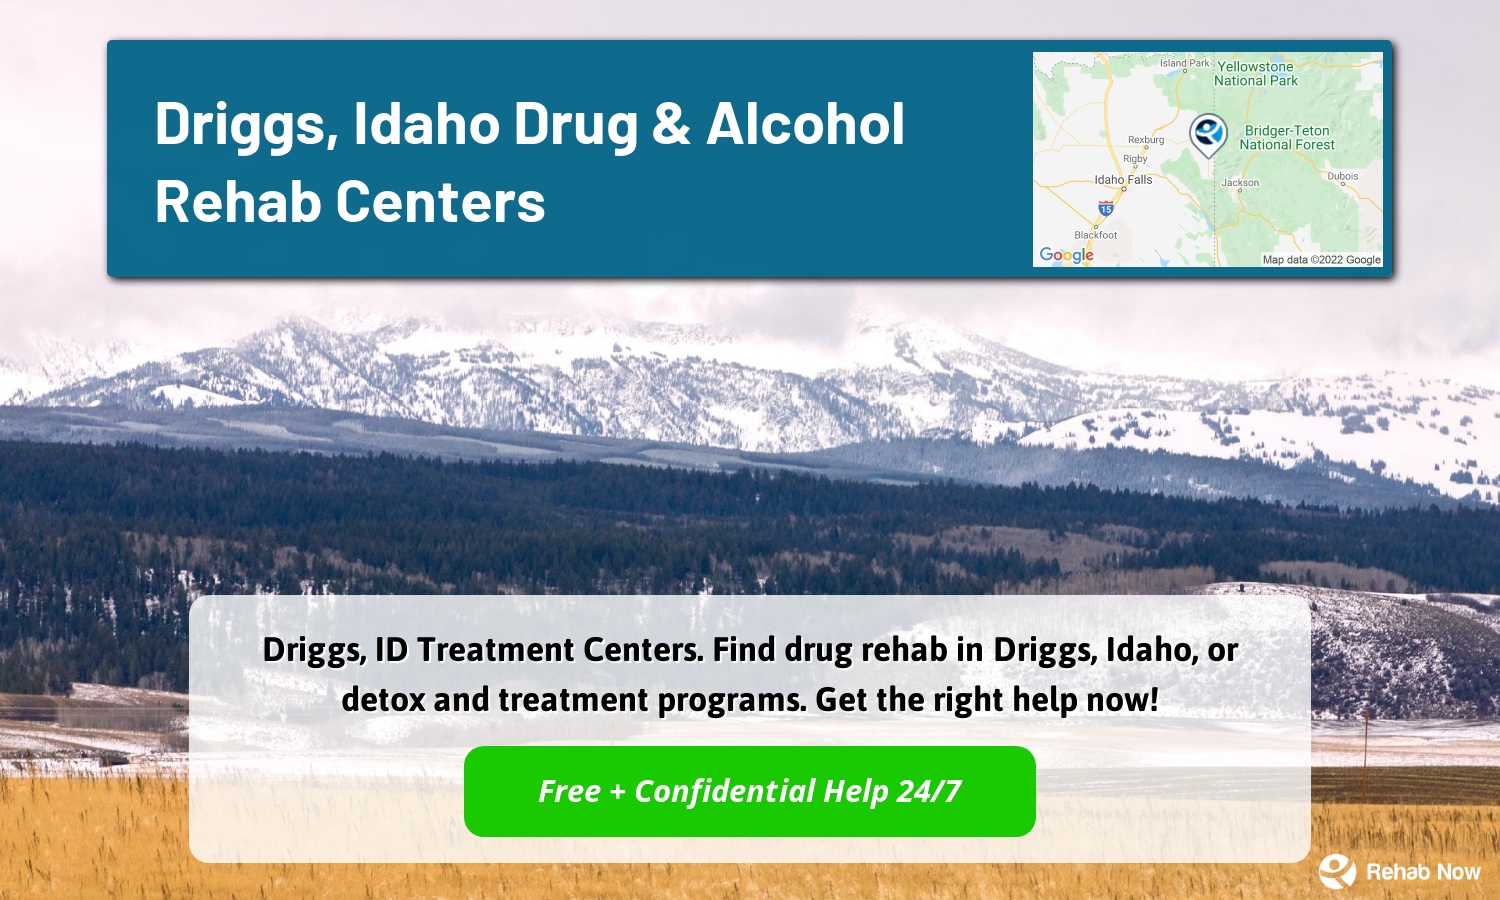 Driggs, ID Treatment Centers. Find drug rehab in Driggs, Idaho, or detox and treatment programs. Get the right help now!